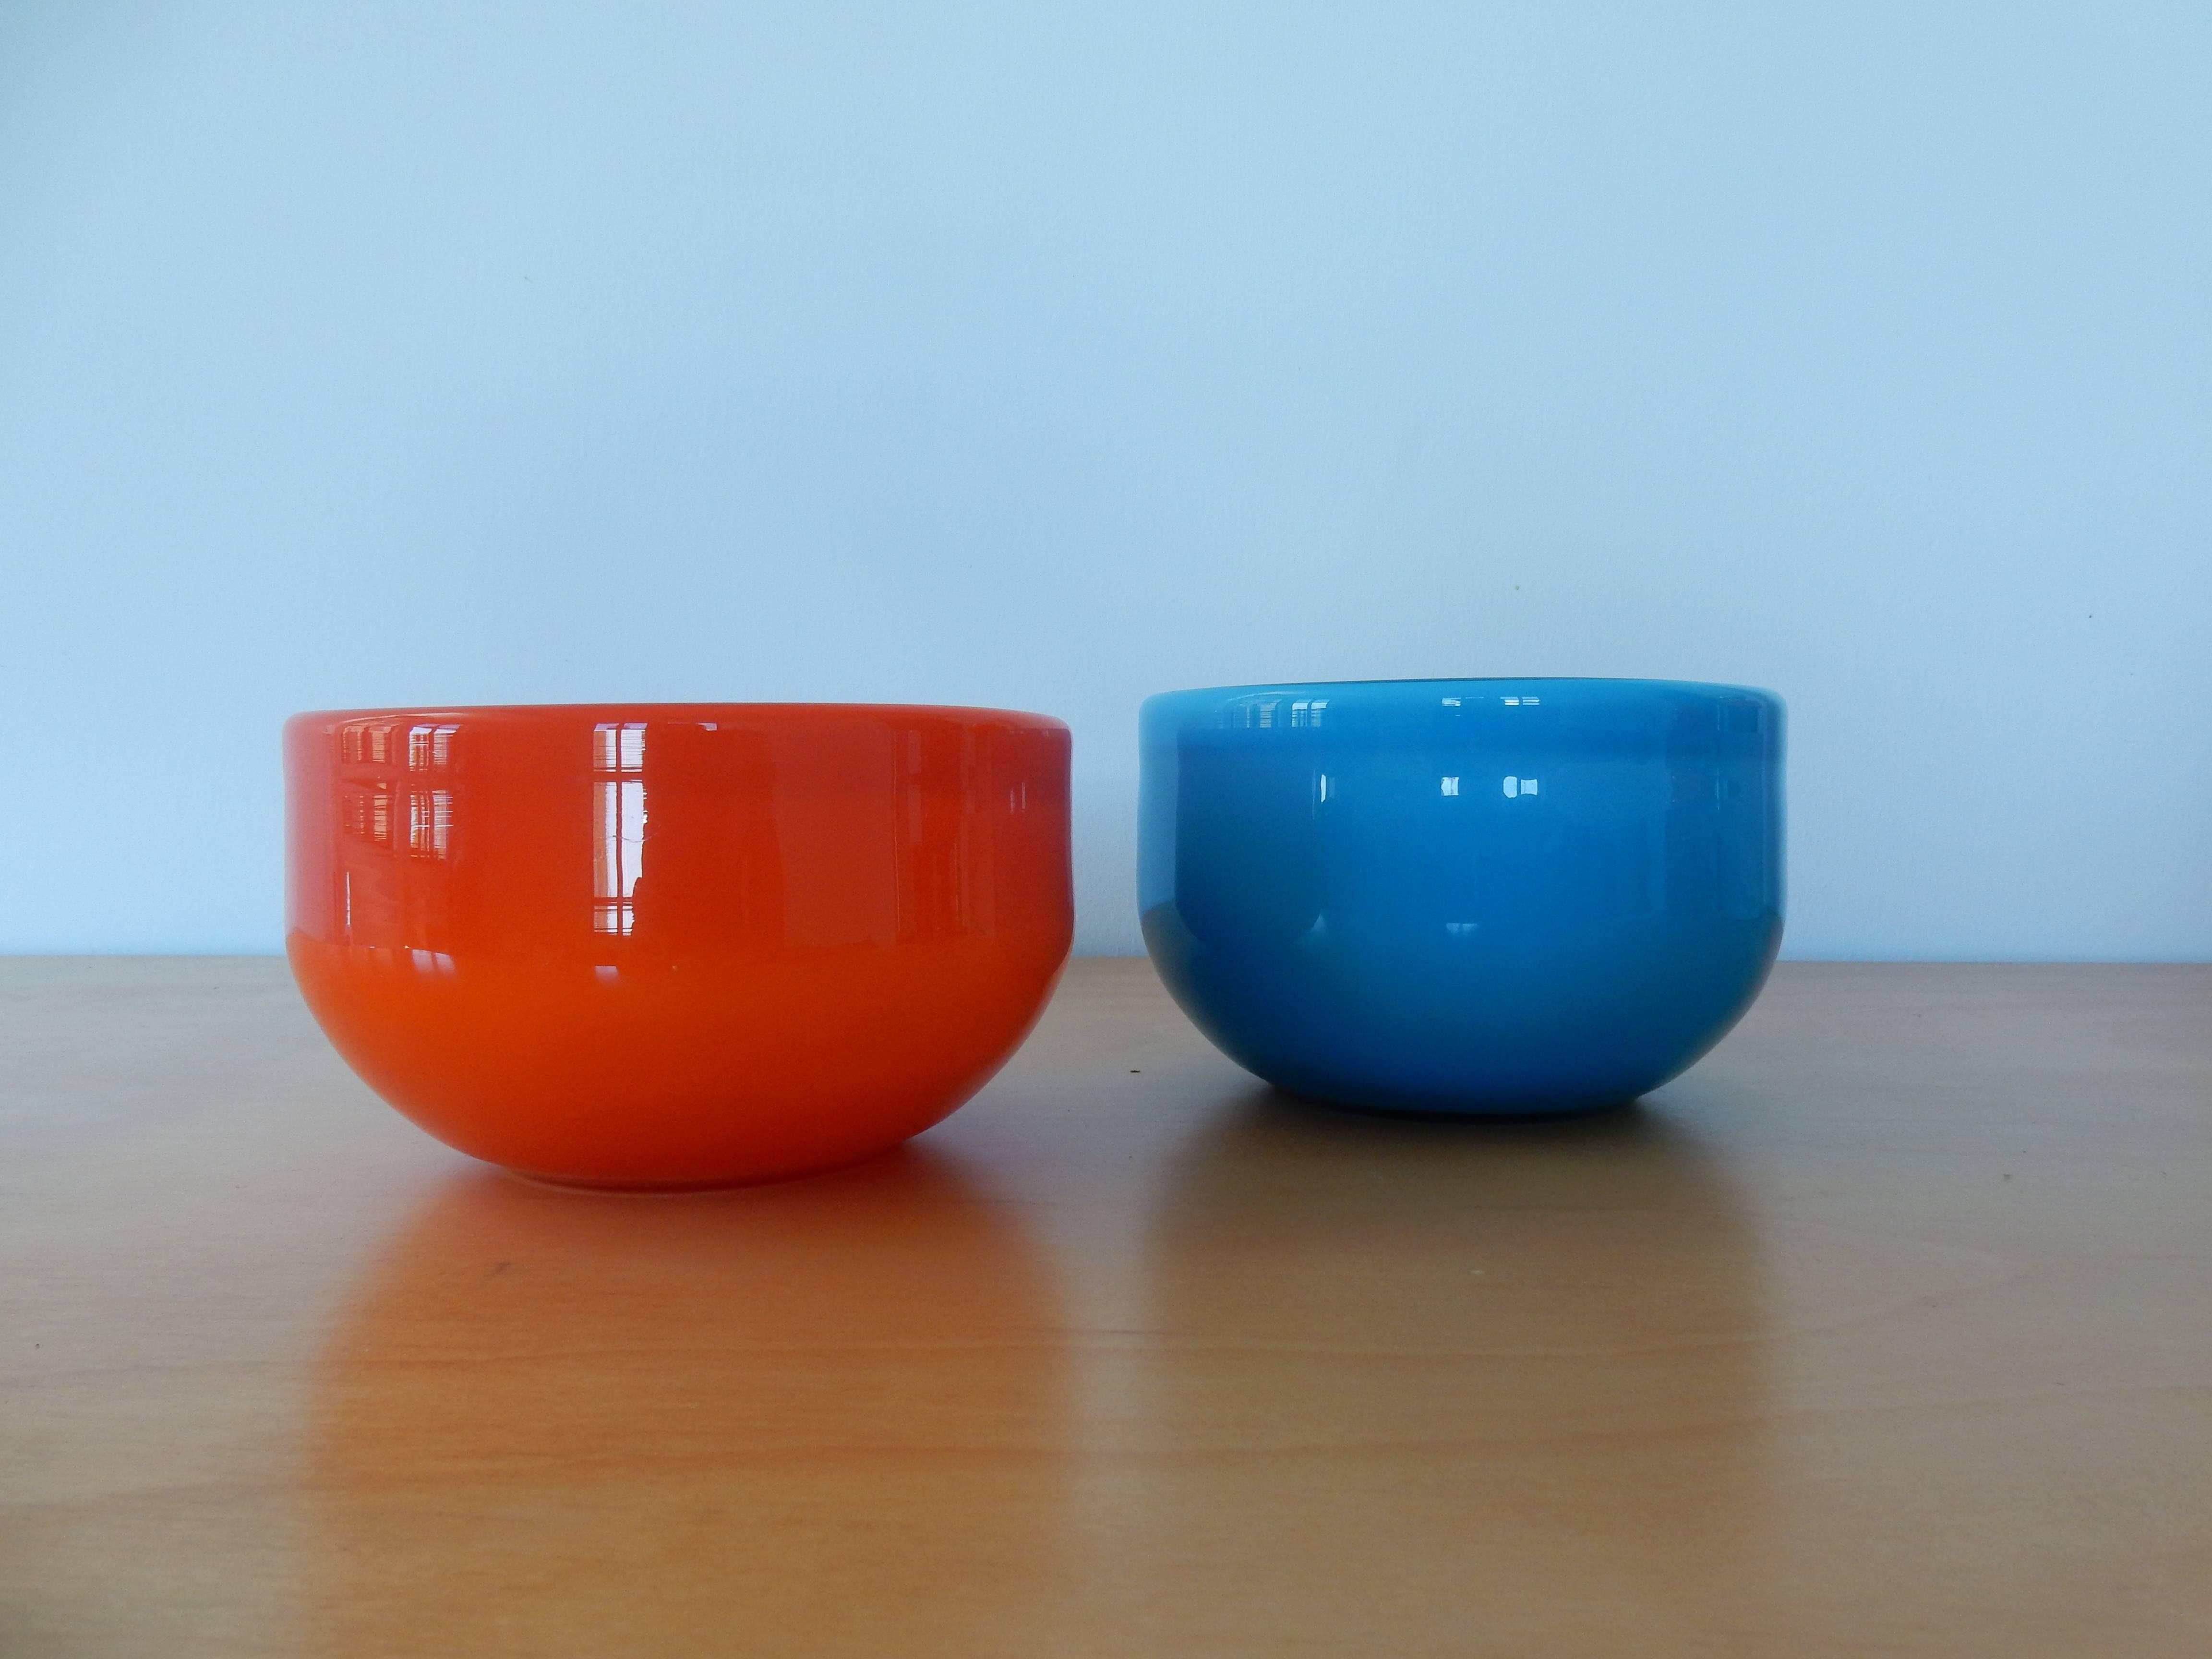 Two very nice medium orange and blue glass bowls from Kastrup-Holmegaard, designed by Michael Bang. In excellent condition with no defects of any kind. The bowls have lost their sticker over time.